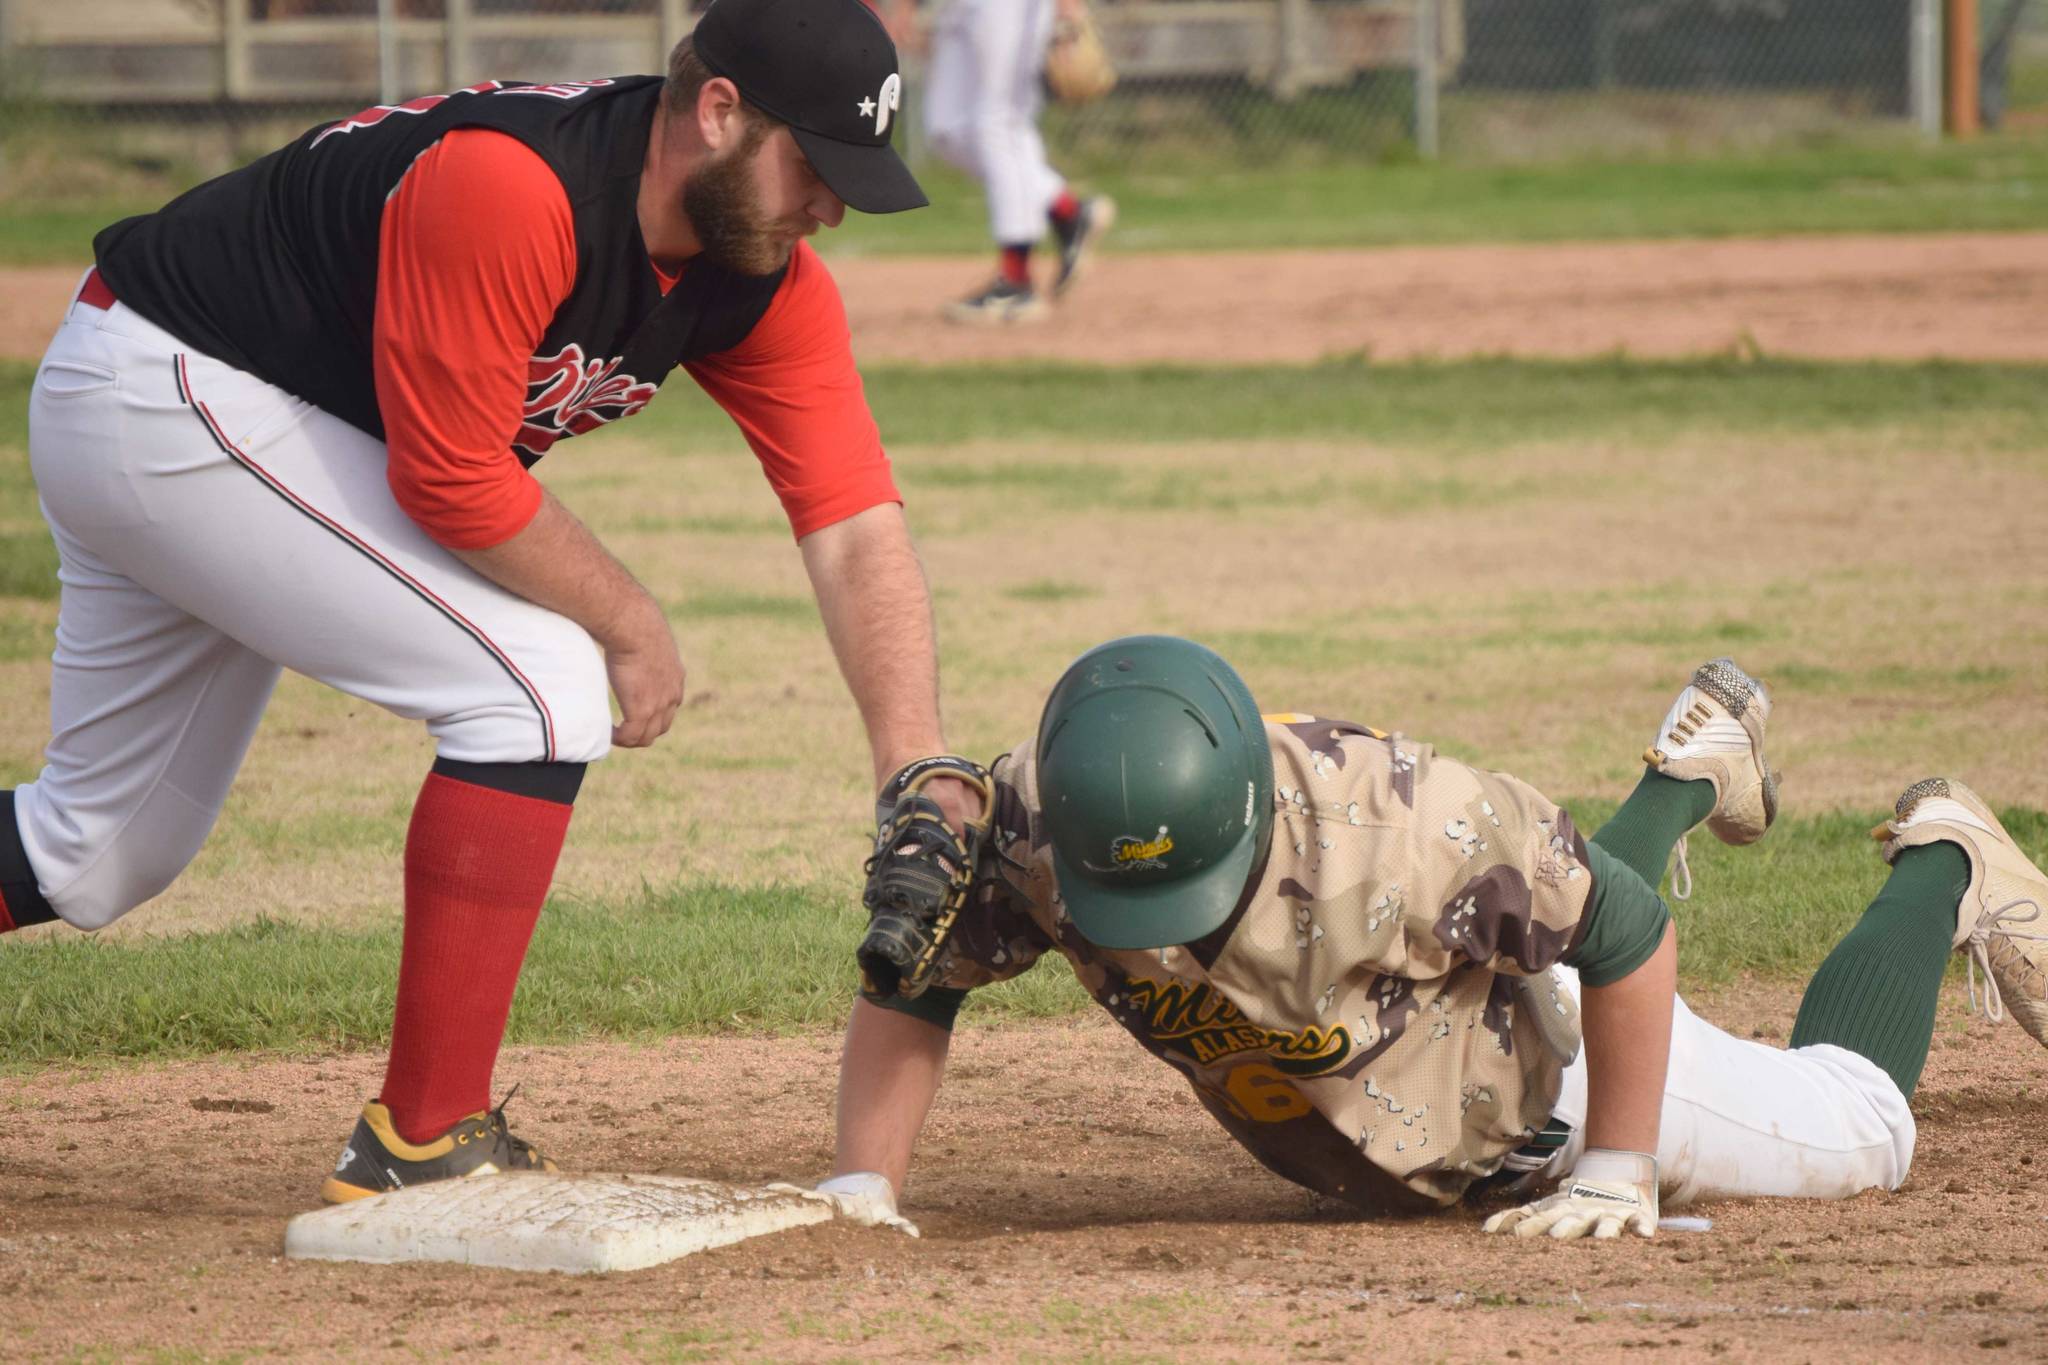 Mike Ferrara of the Mat-Su Miners dives safely back to first base in front of Oilers first baseman Bryce Marsh on Monday, June 21, 2021, at Coral Seymour Memorial Park in Kenai, Alaska. (Photo by Jeff Helminiak/Peninsula Clarion)